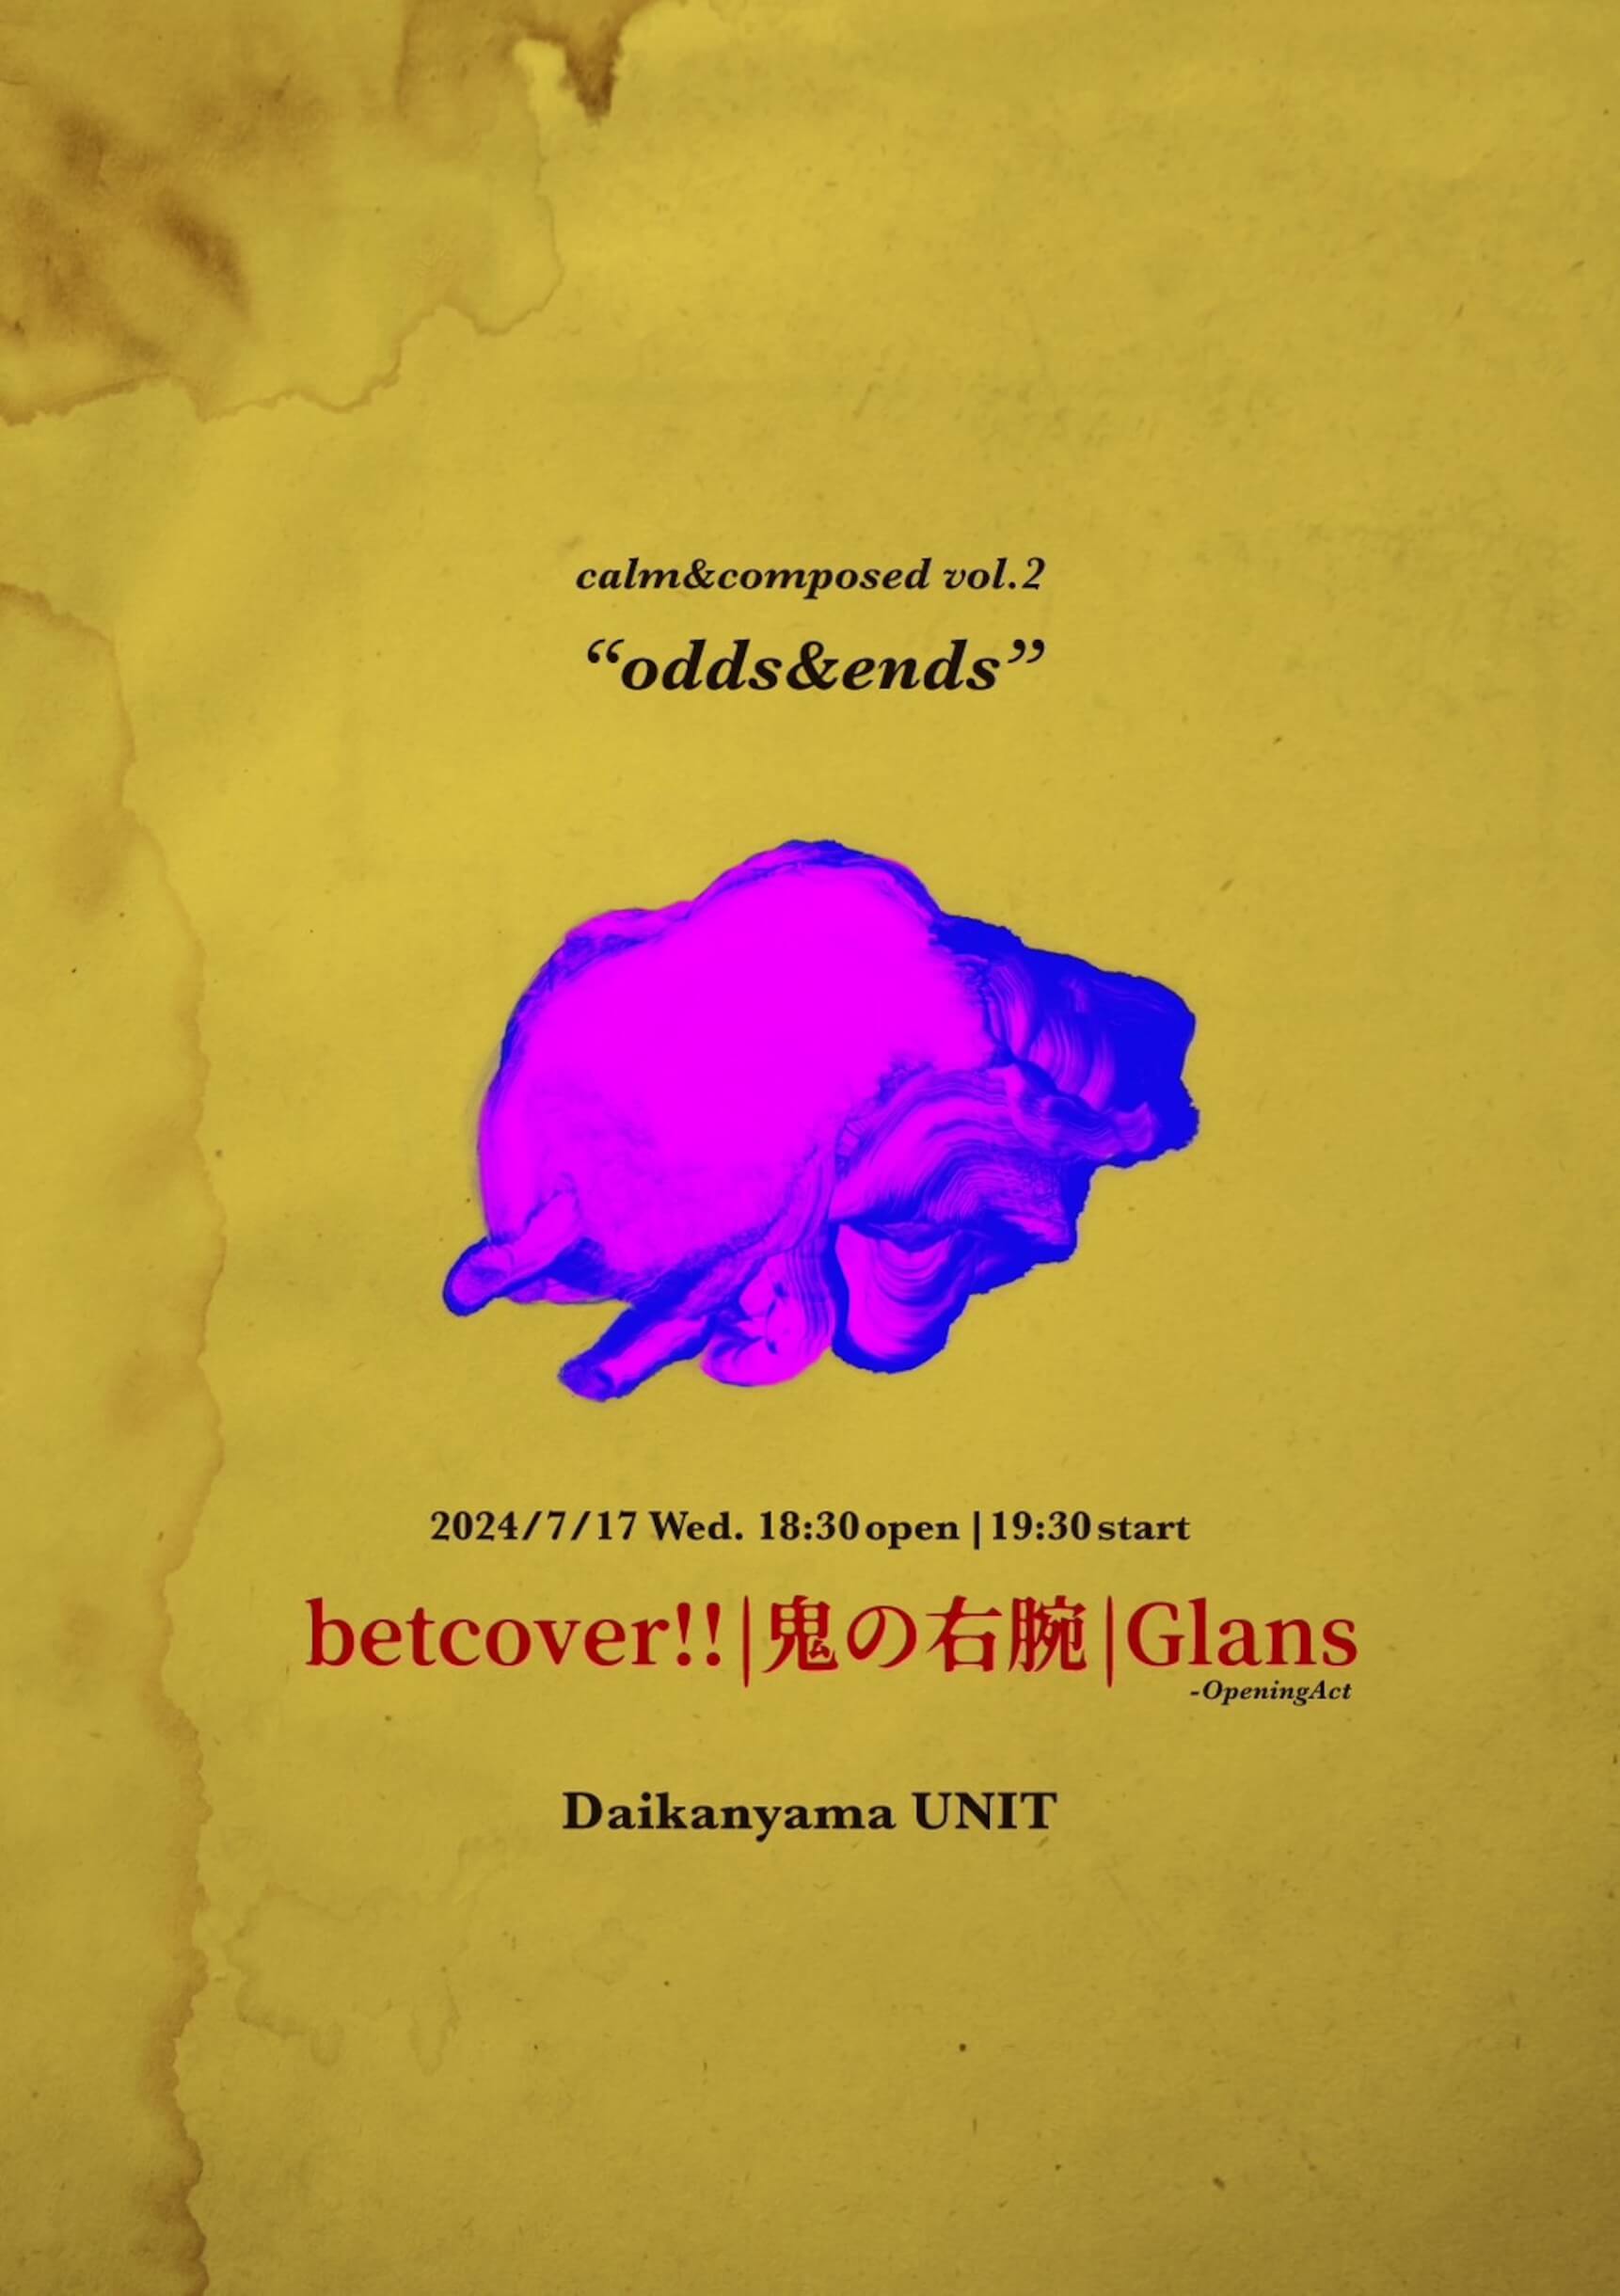 betcover!!と鬼の右腕が競演、オープニングアクトとしてGlansが登場｜AIR FLAG Inc主催のイベント＜calm&composed vol.2【odds&ends】＞代官⼭UNITにて開催 music240313-calm-and-composed1